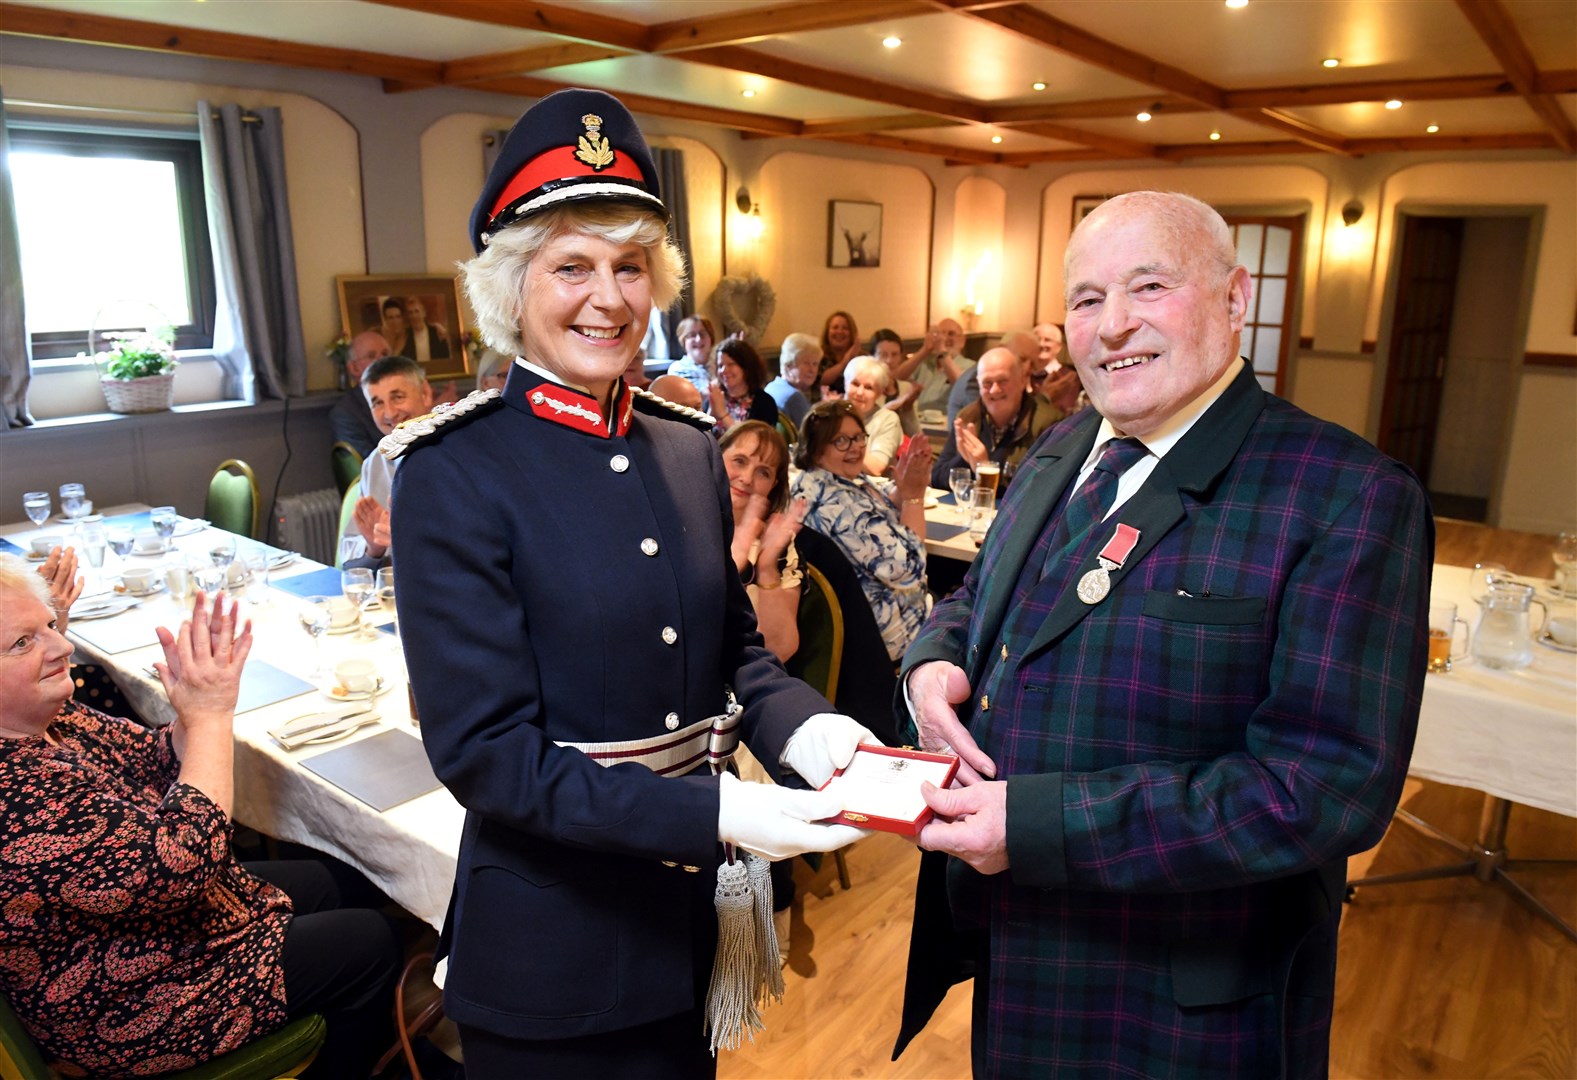 Tom Thomas BEM presentation: Joanie Whiteford, Lord Lieutenant of Ross-shire presenting Tom Thomas with the British Empire Medal. Picture: James Mackenzie.